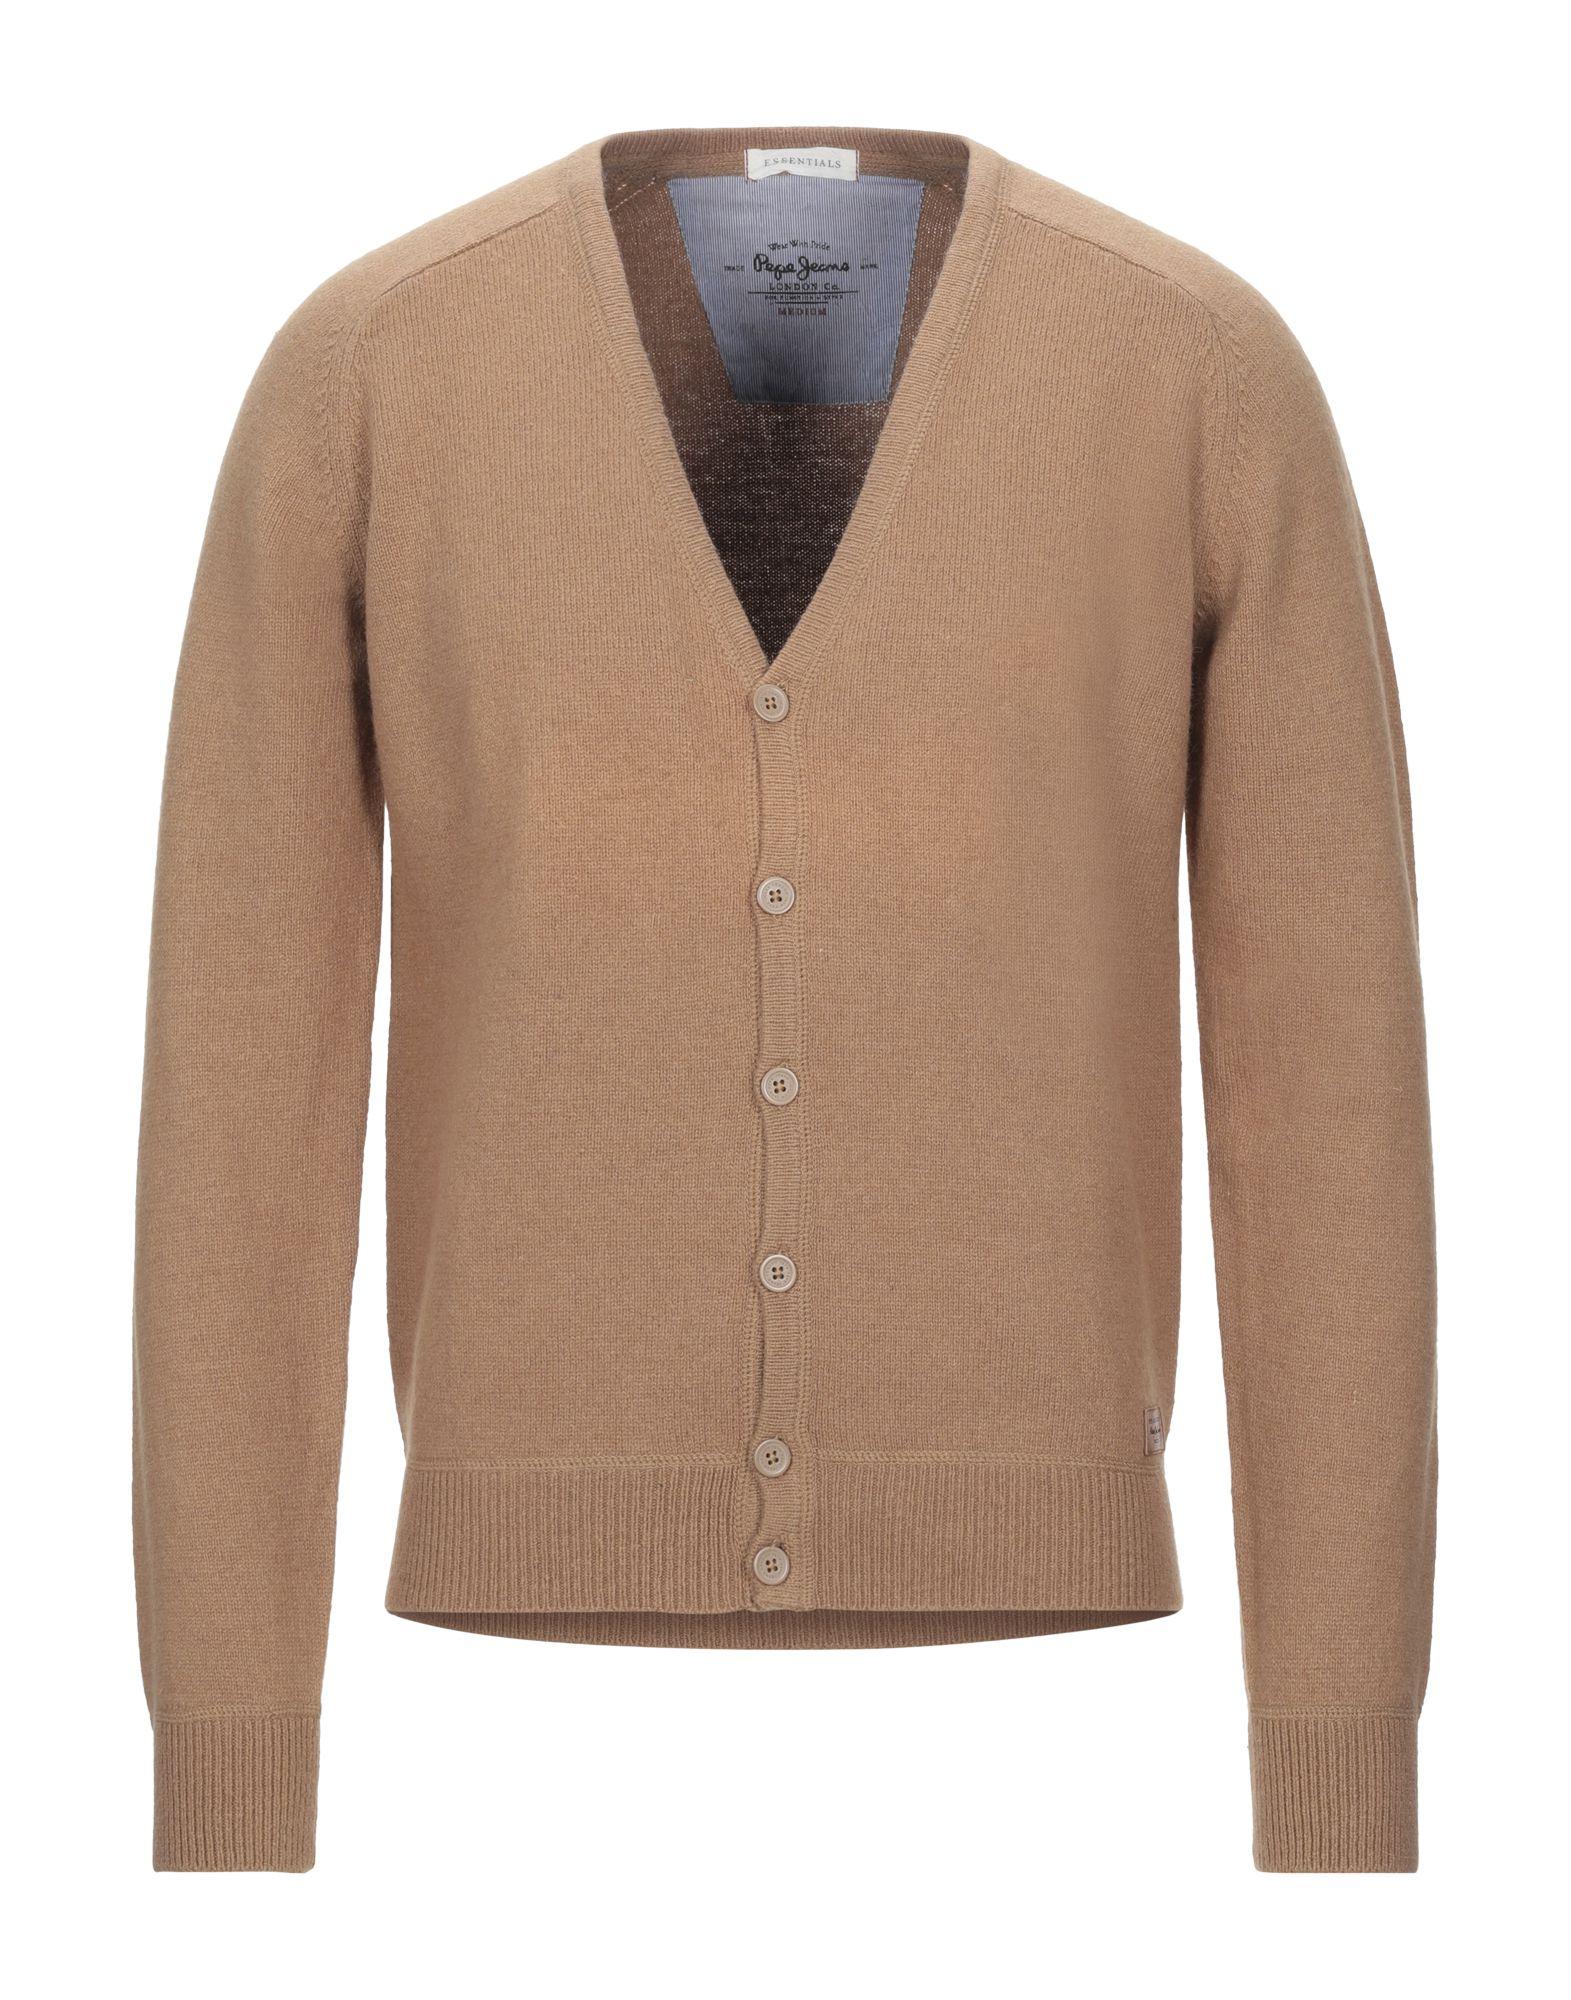 Pepe Jeans Synthetic Cardigan in Camel (Brown) for Men - Lyst